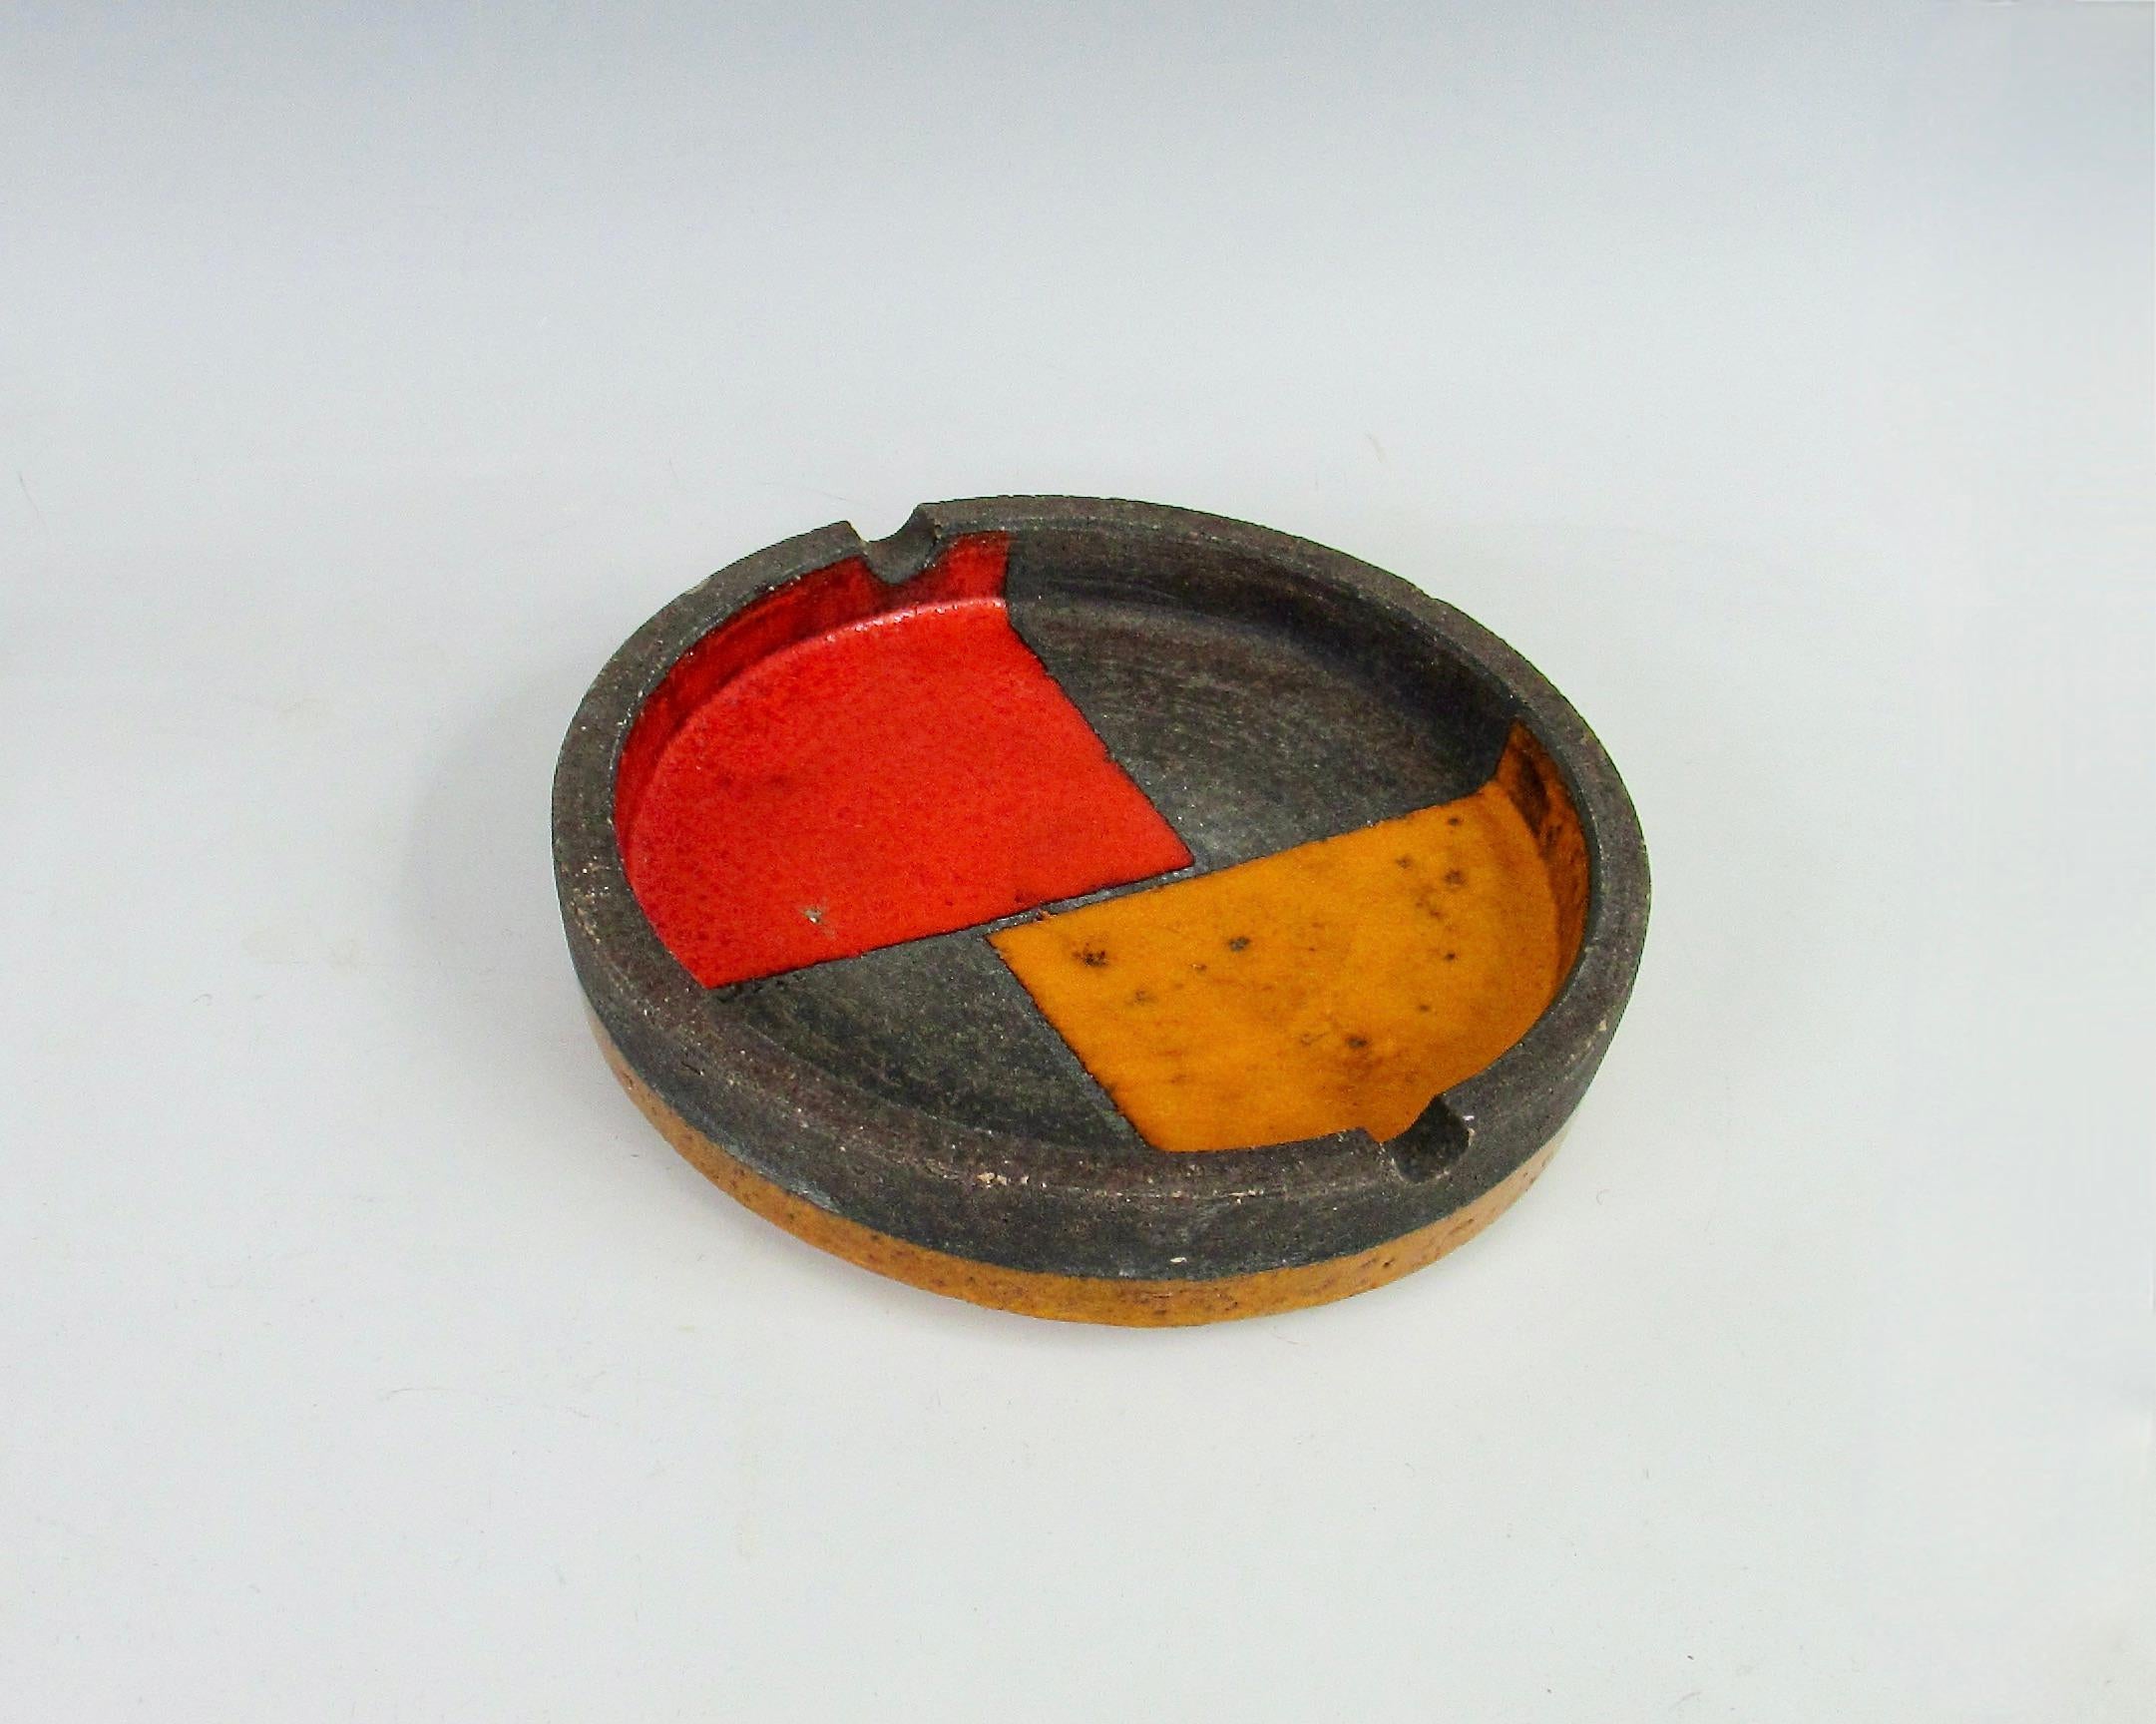 Glazed Orange and red round Italian pottery ashtray with chip For Sale